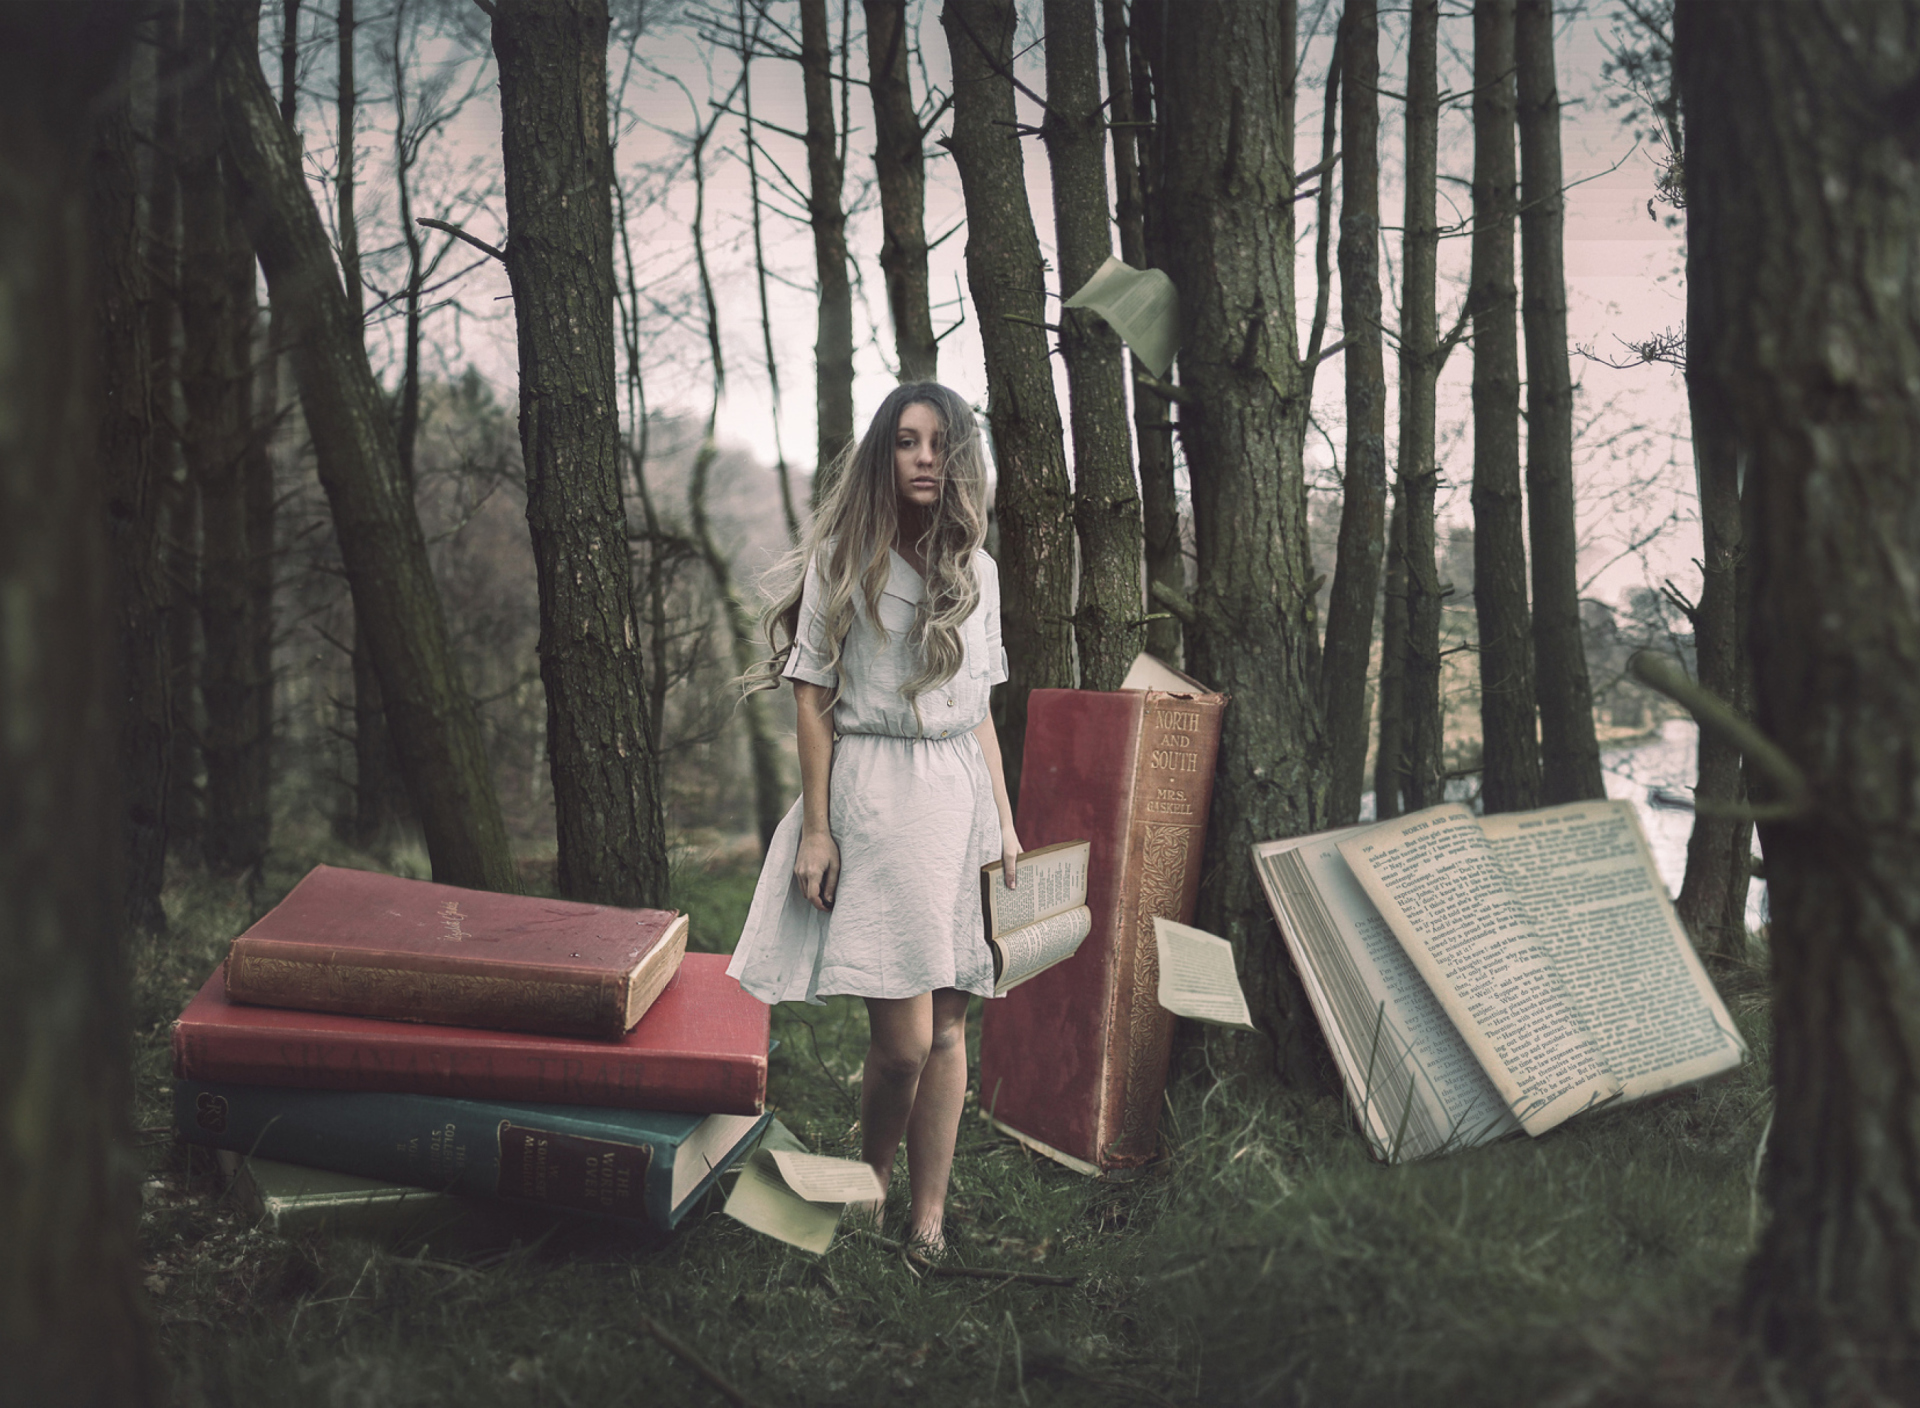 Sfondi Forest Nymph Surrounded By Books 1920x1408